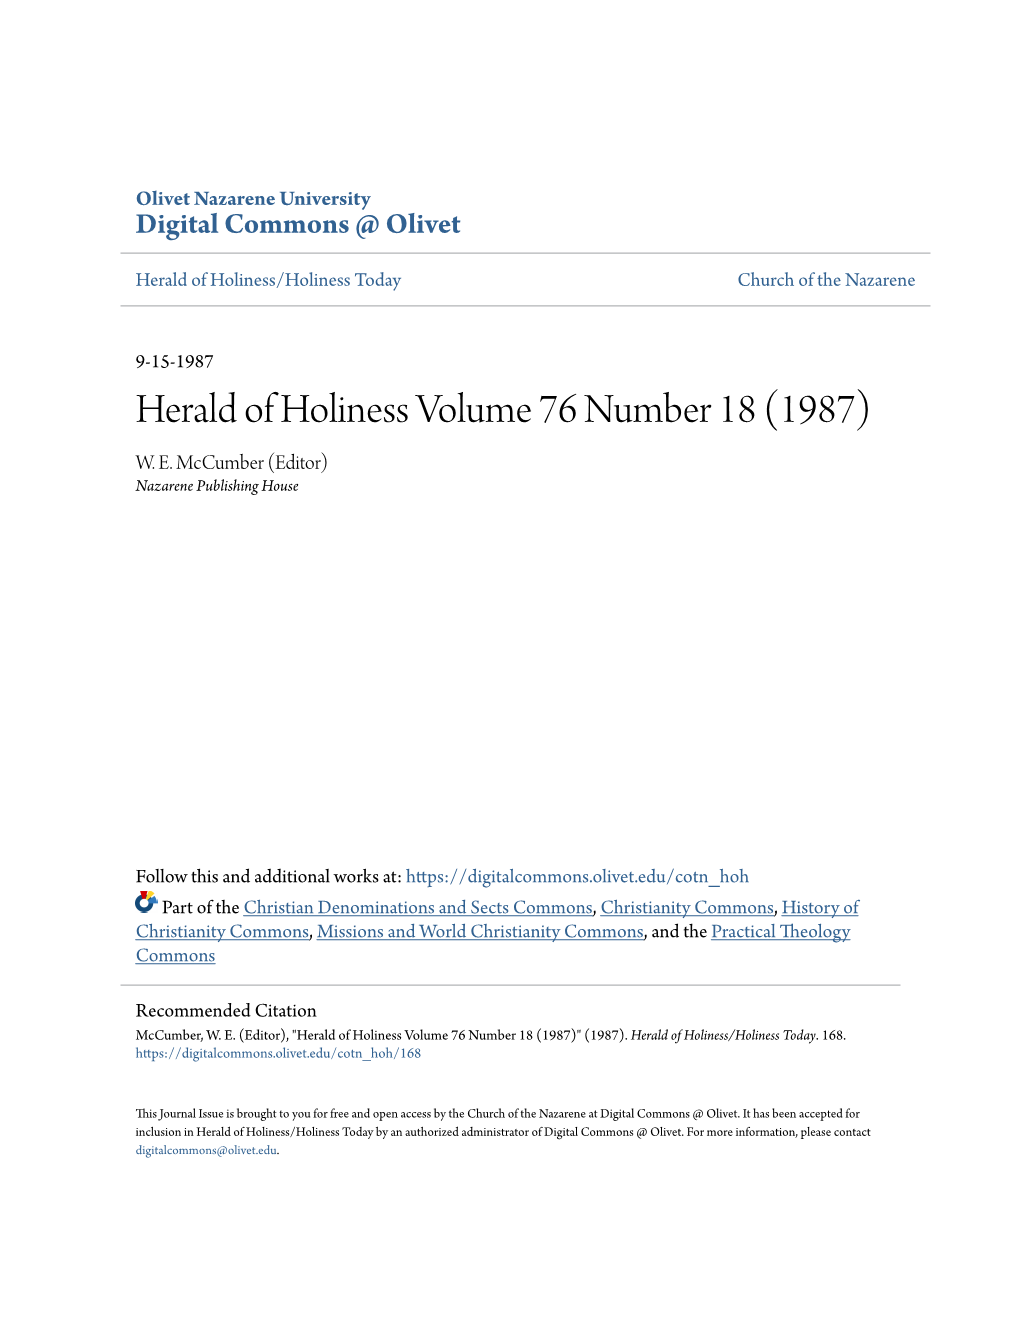 Herald of Holiness Volume 76 Number 18 (1987) W